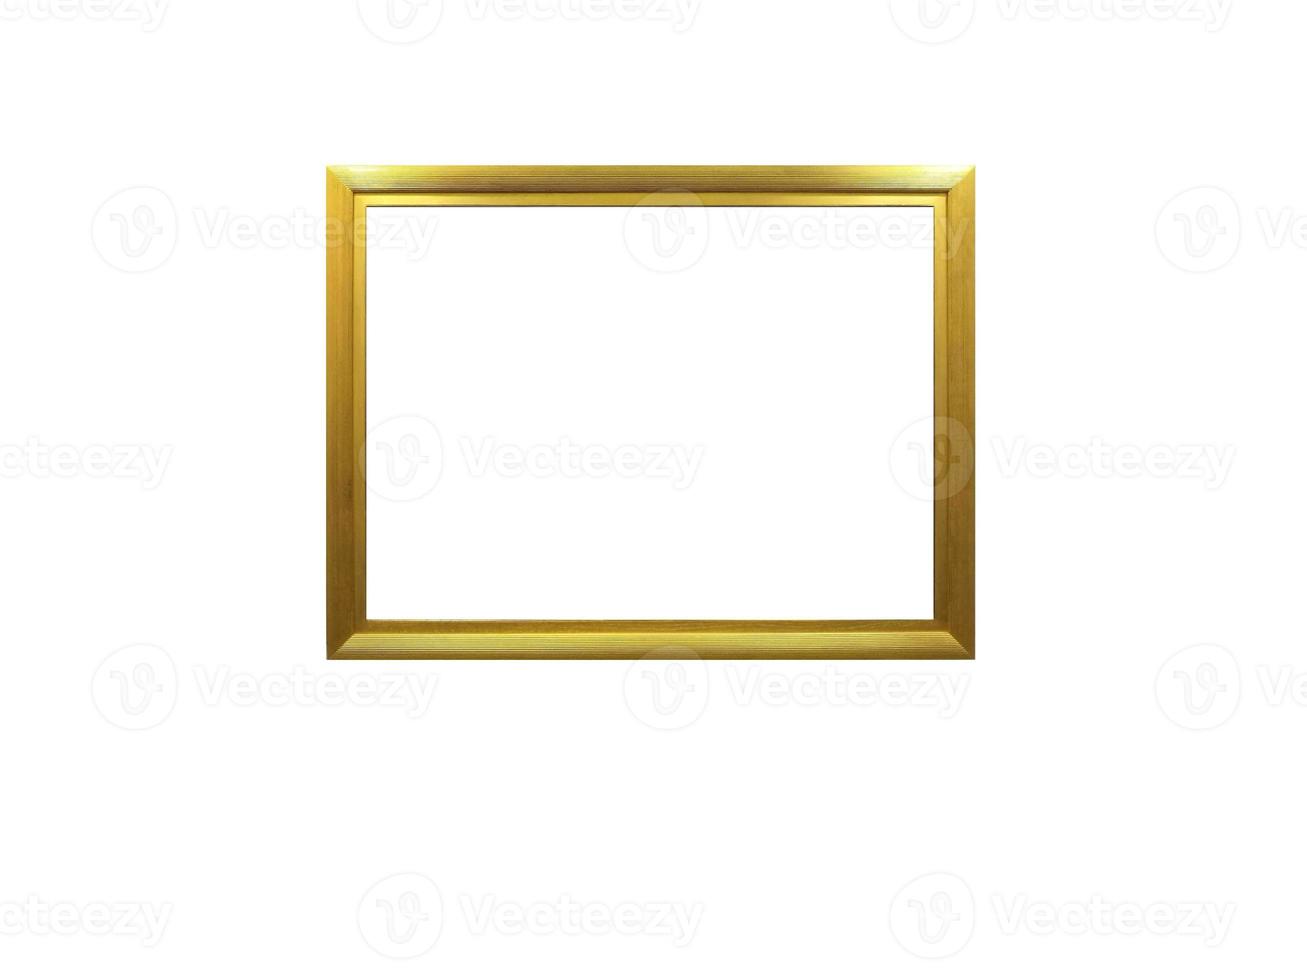 Wooden Photo Frame vintage frame decorations Isolated Background Clipping path